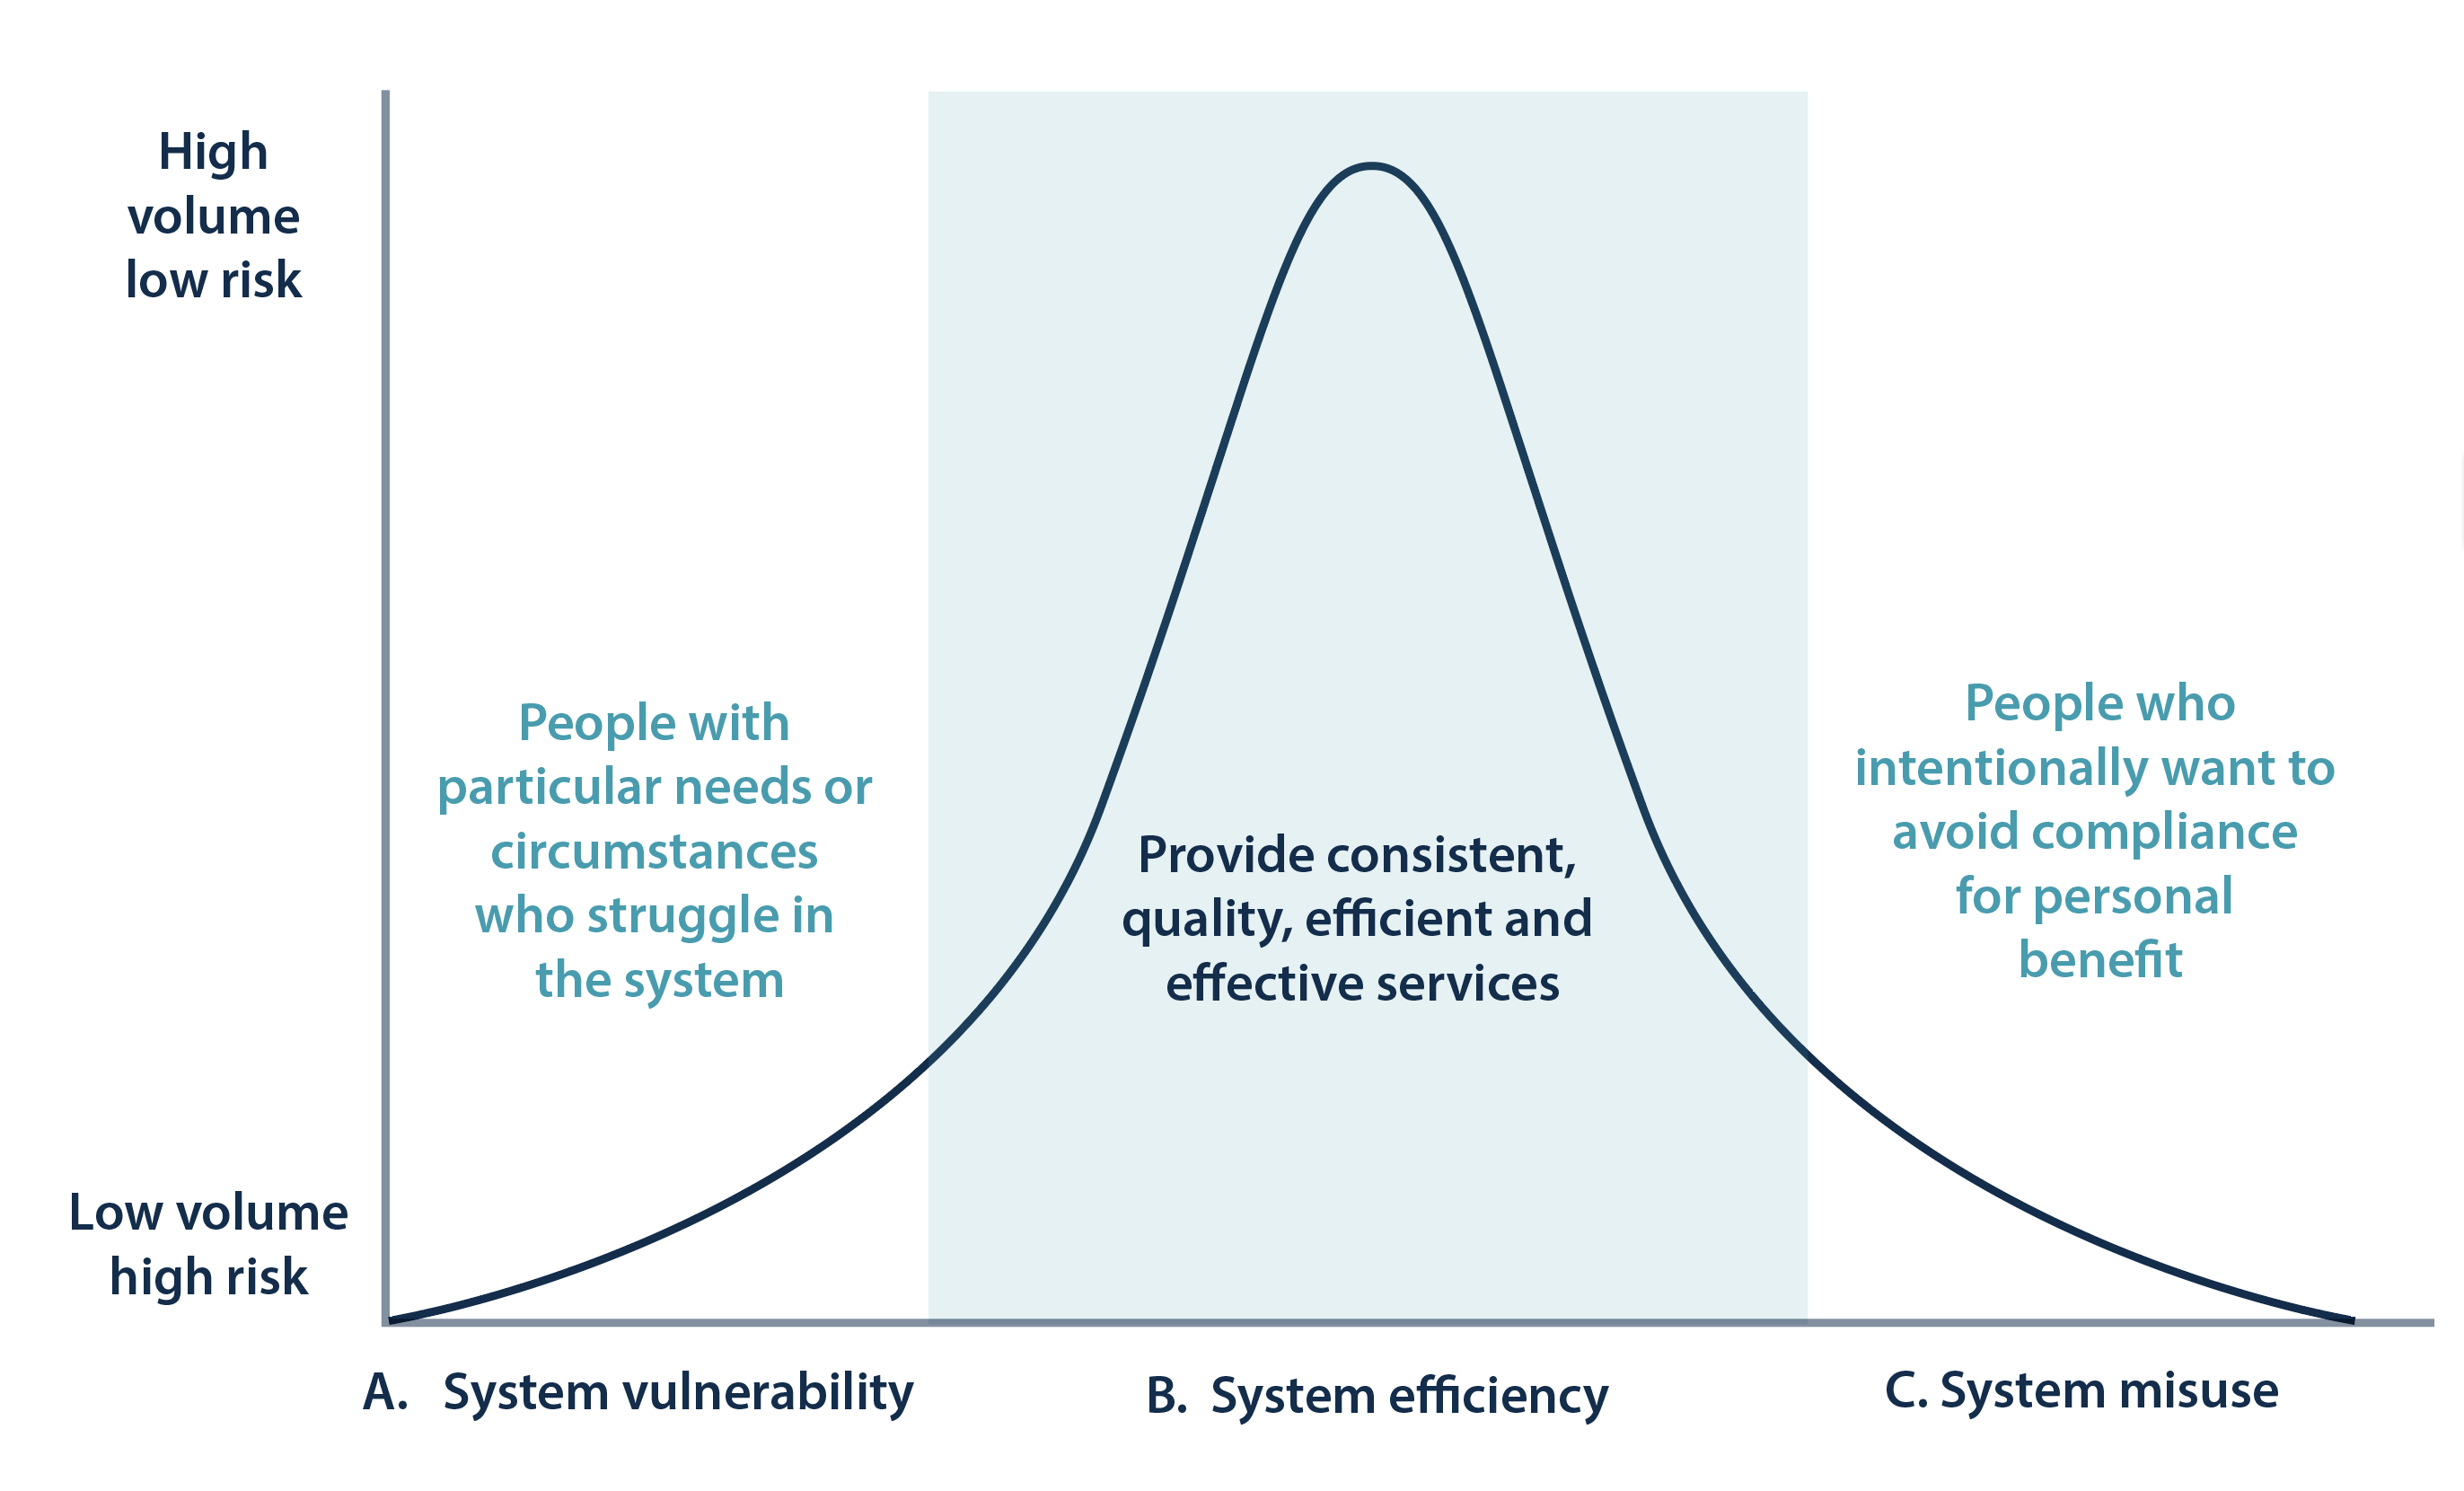 Bell curve: Personal insolvencies, system vulnerability, efficiency, misuse trends.